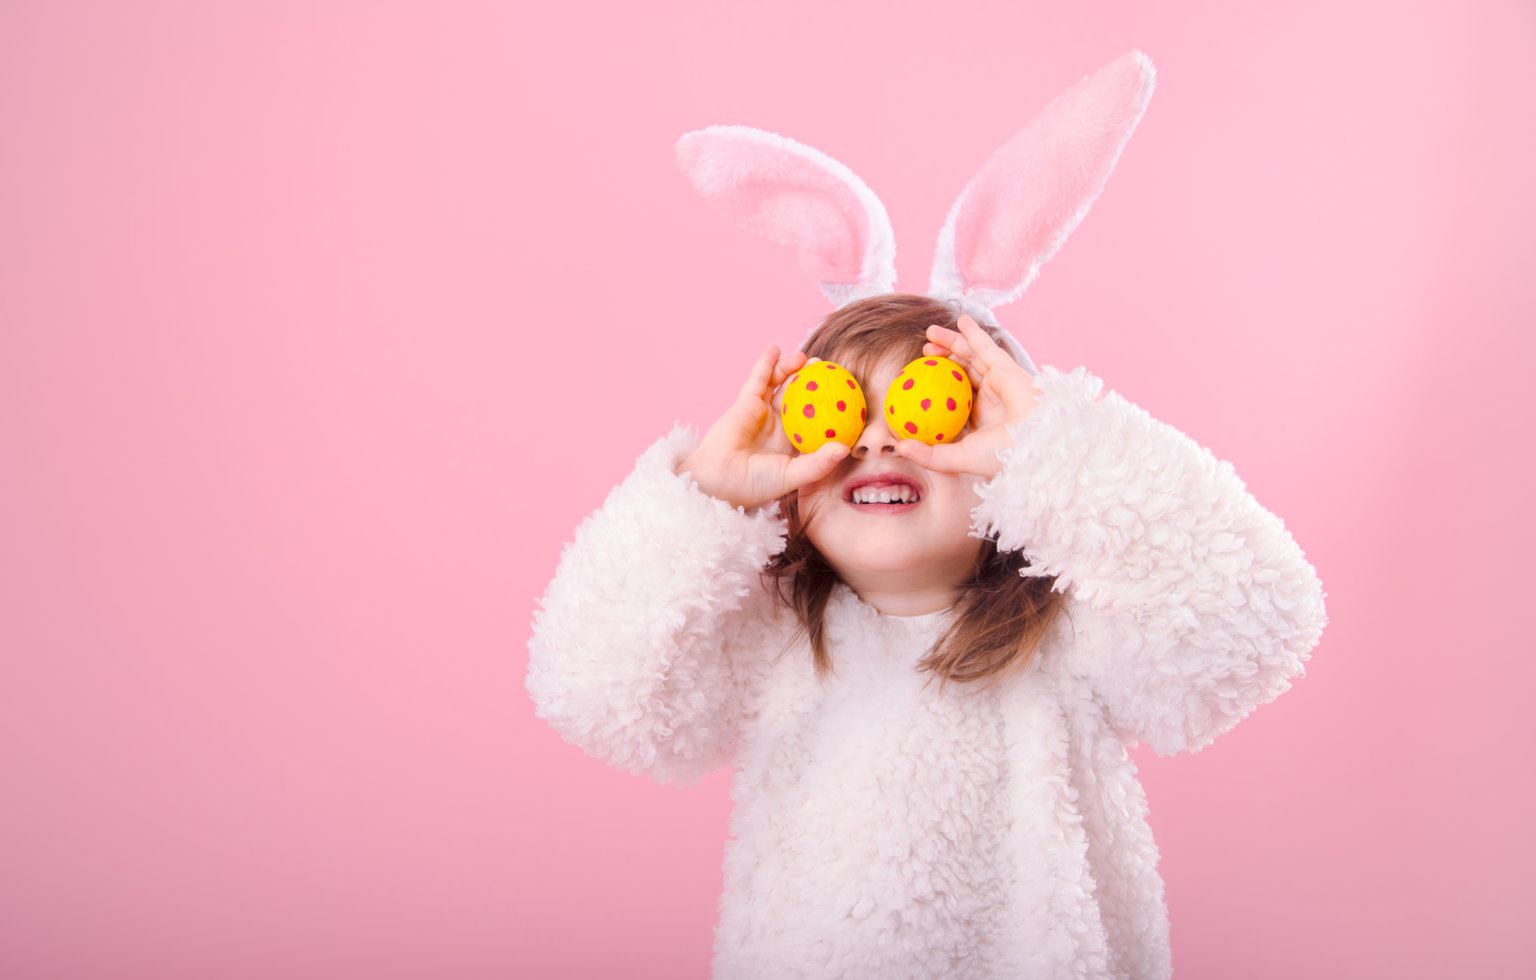 New Recipe The Best Easter Events and Activities Around NYC! Cake Baking